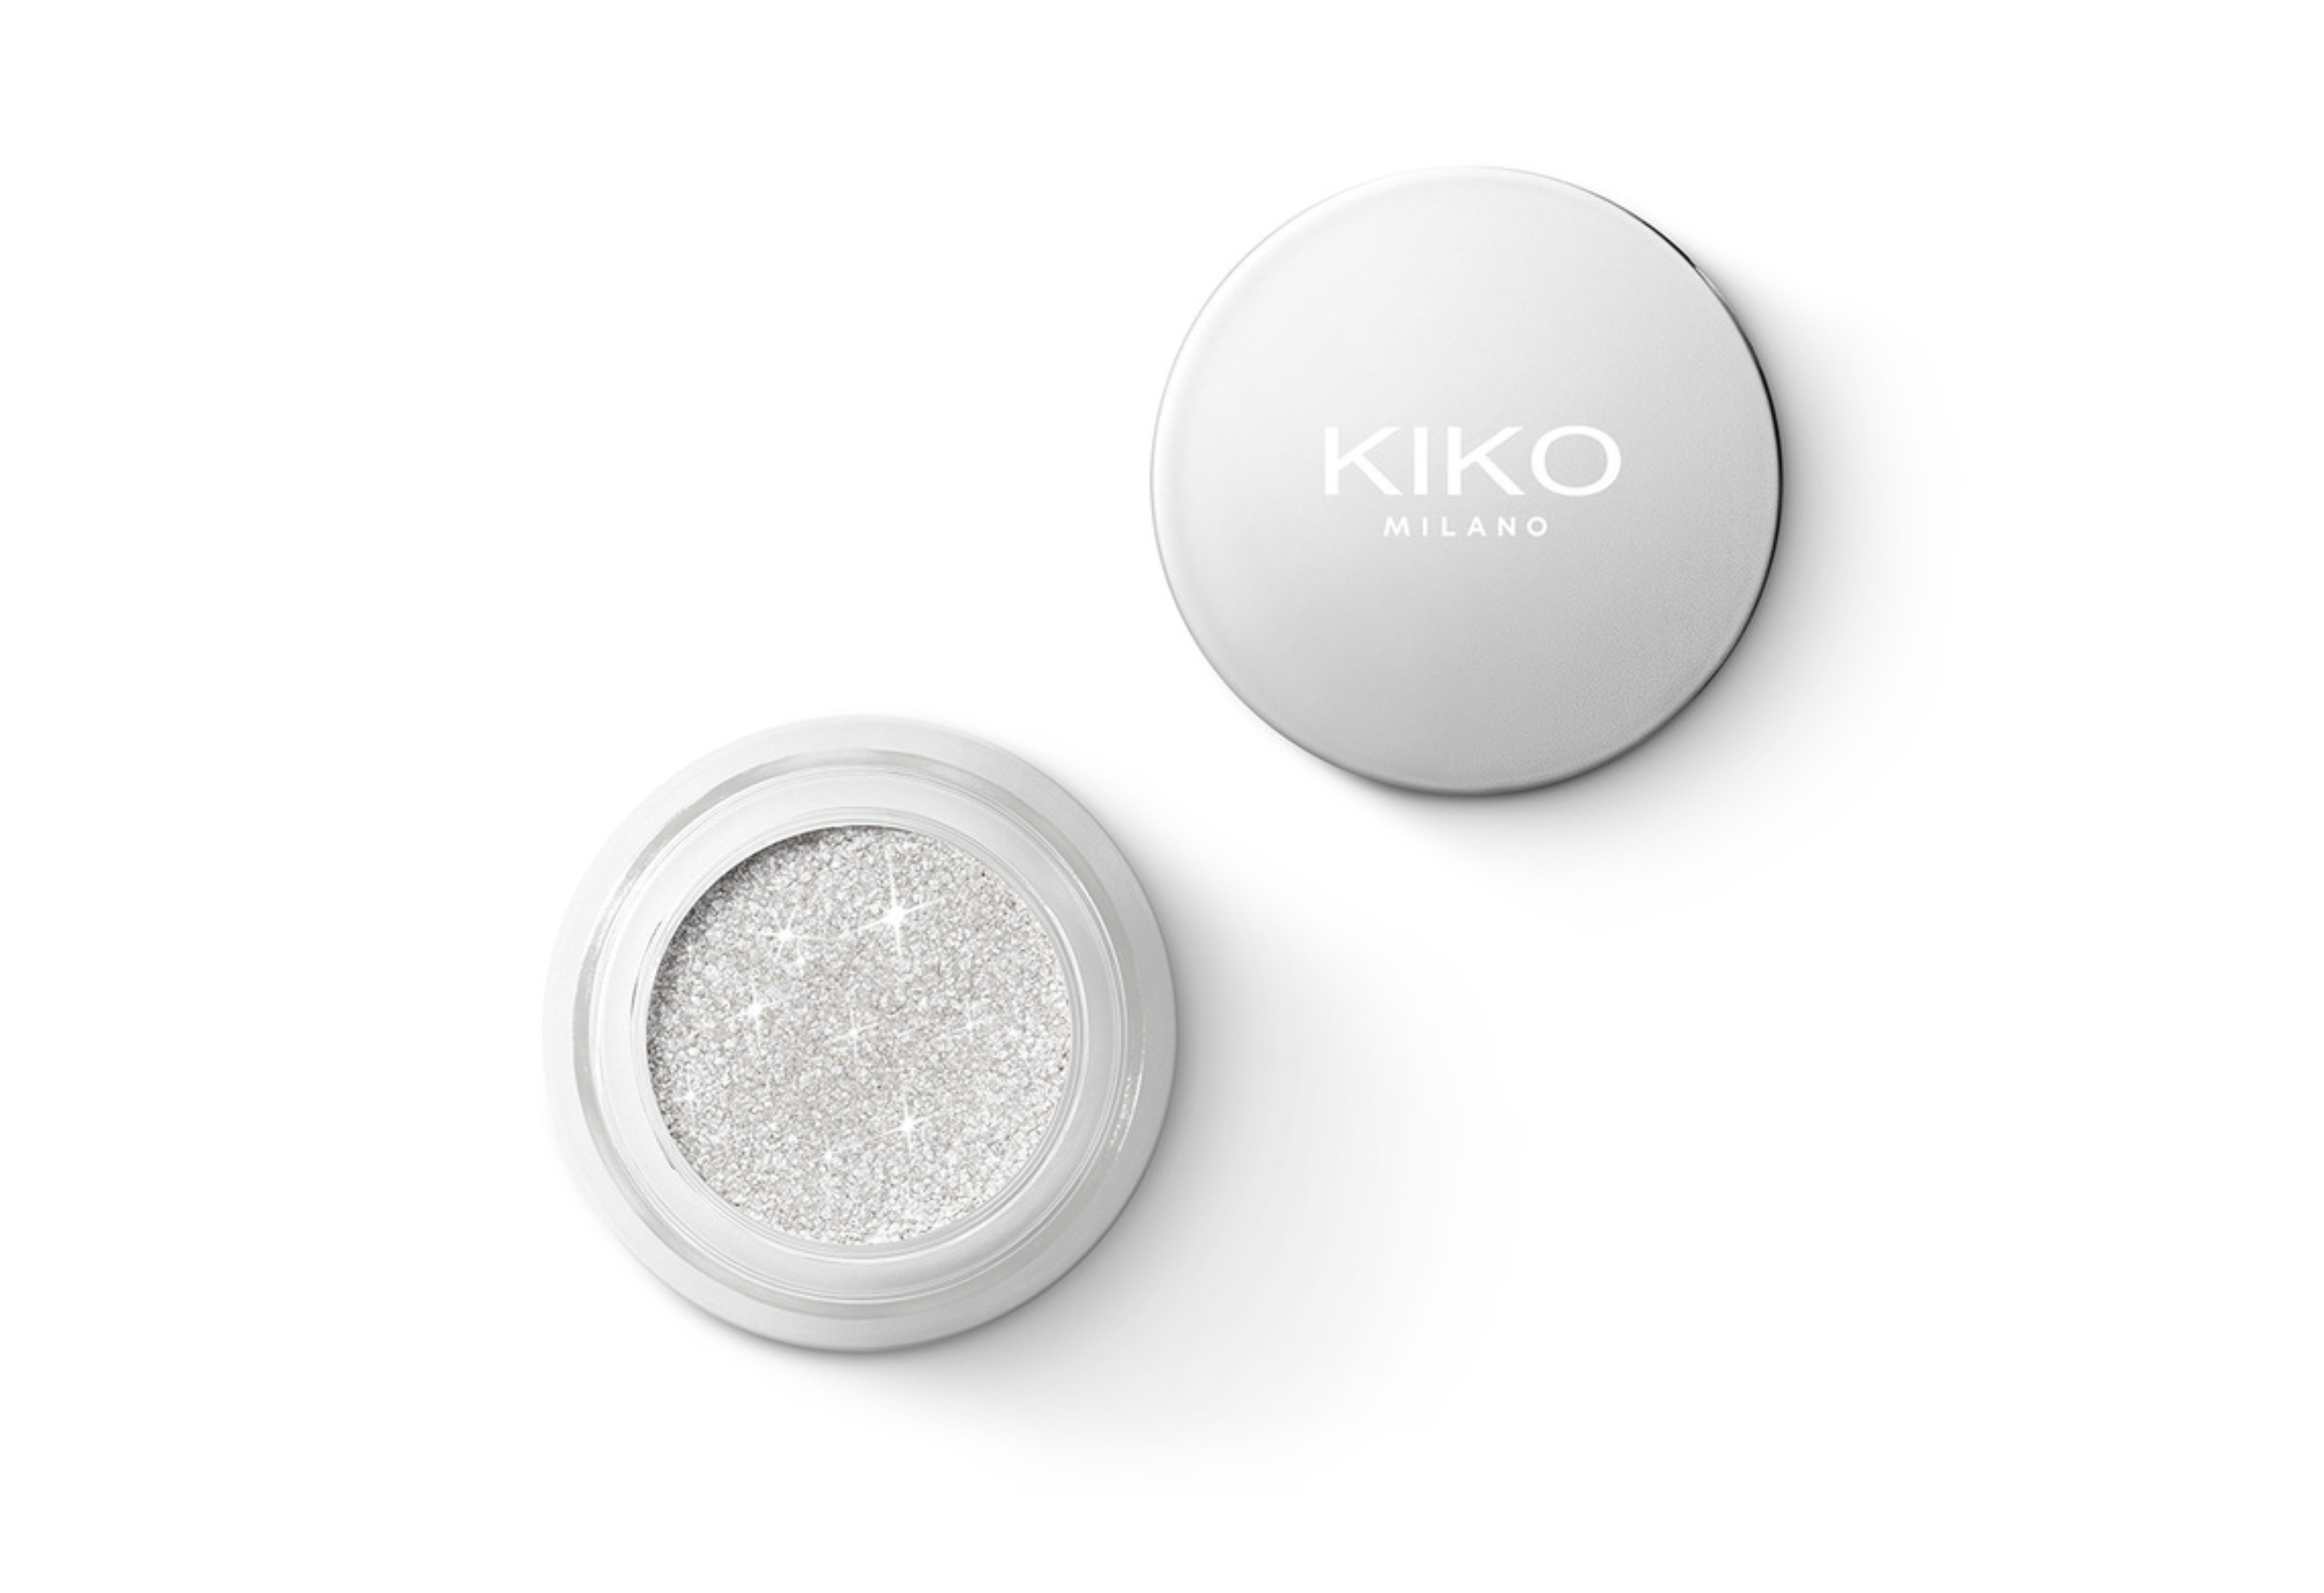 'Blue Me Sparkling Eyeshadow' in the shade 'White Breeze' by Kiko